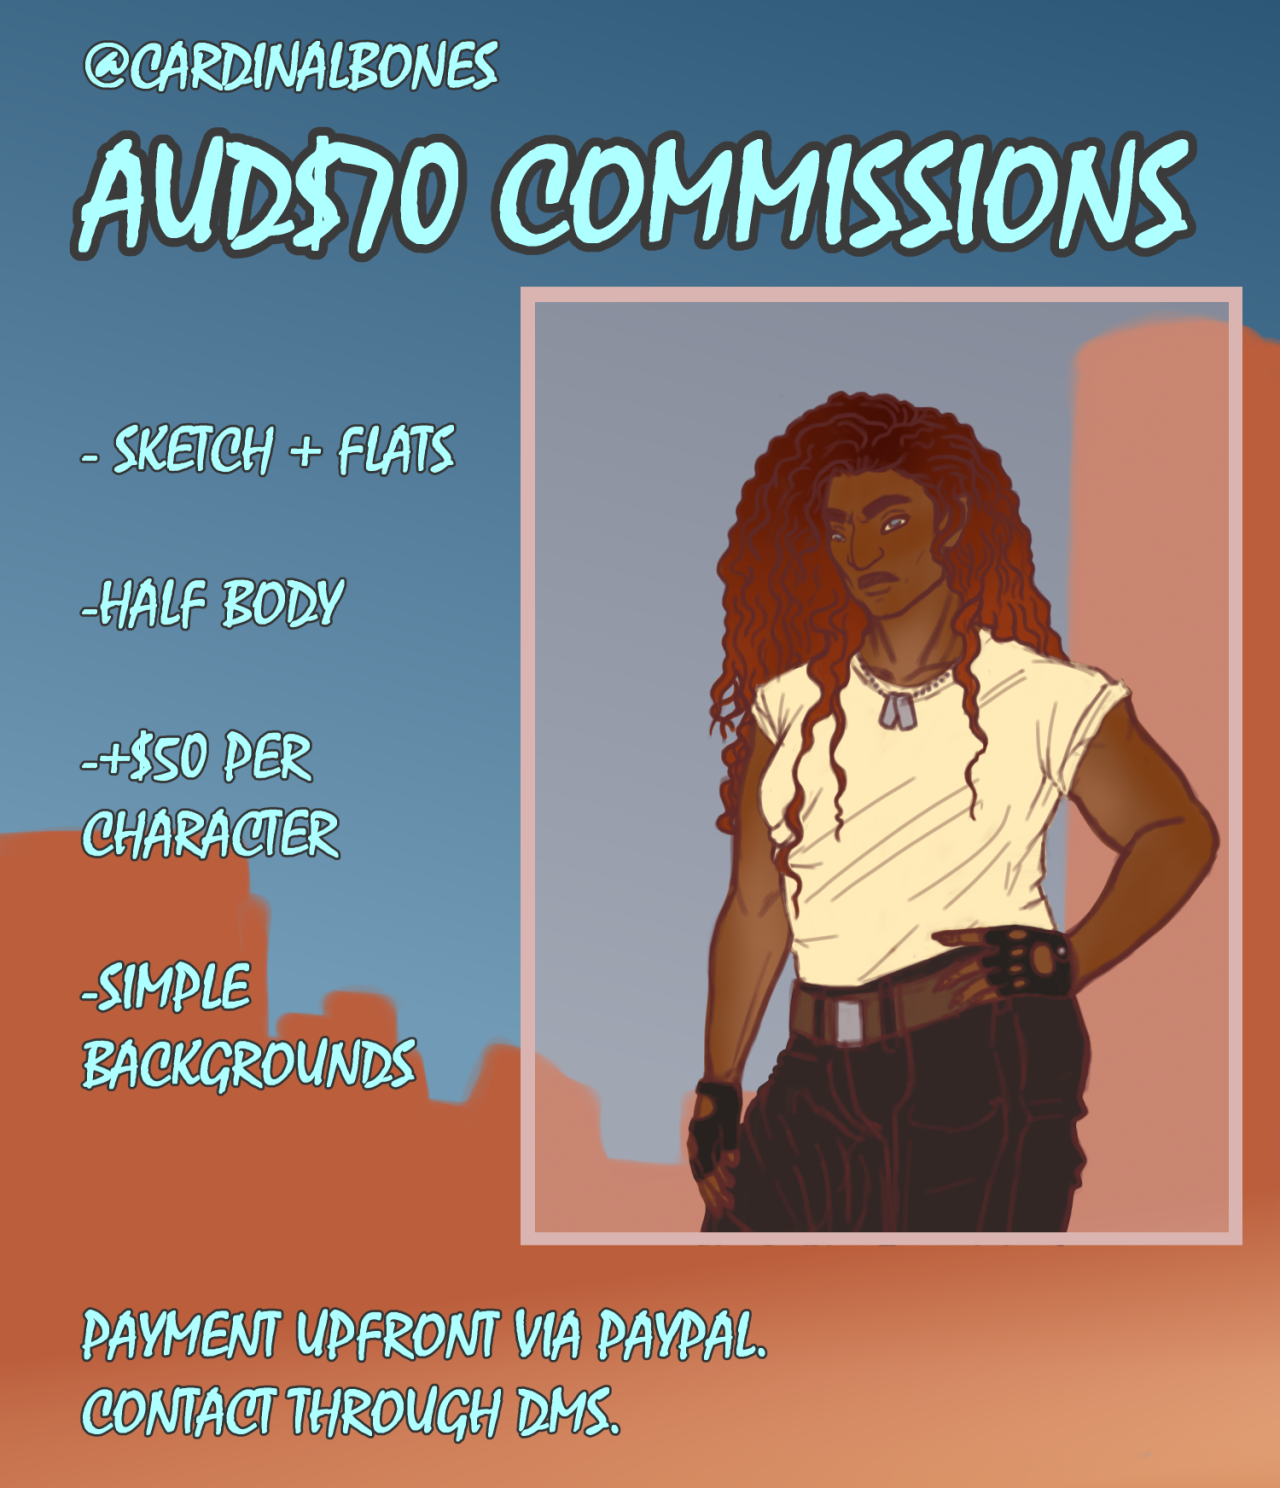 A digital poster advertising commissions. The background is blue with orange mountainous shapes along the bottom. To the right is an sketch of a person with brown skin and orange wavy hair. They are wearing a white shirt, dark pants, fingerless gloves and dog tags. Blue text in a rough font with dark grey outline reads, from the top: @cardinalbones. AUD$70 commissions. Sketch + flats. Half body. $50 per character. Simple backgrounds. Payment upfront via paypal. Contact through DMs.